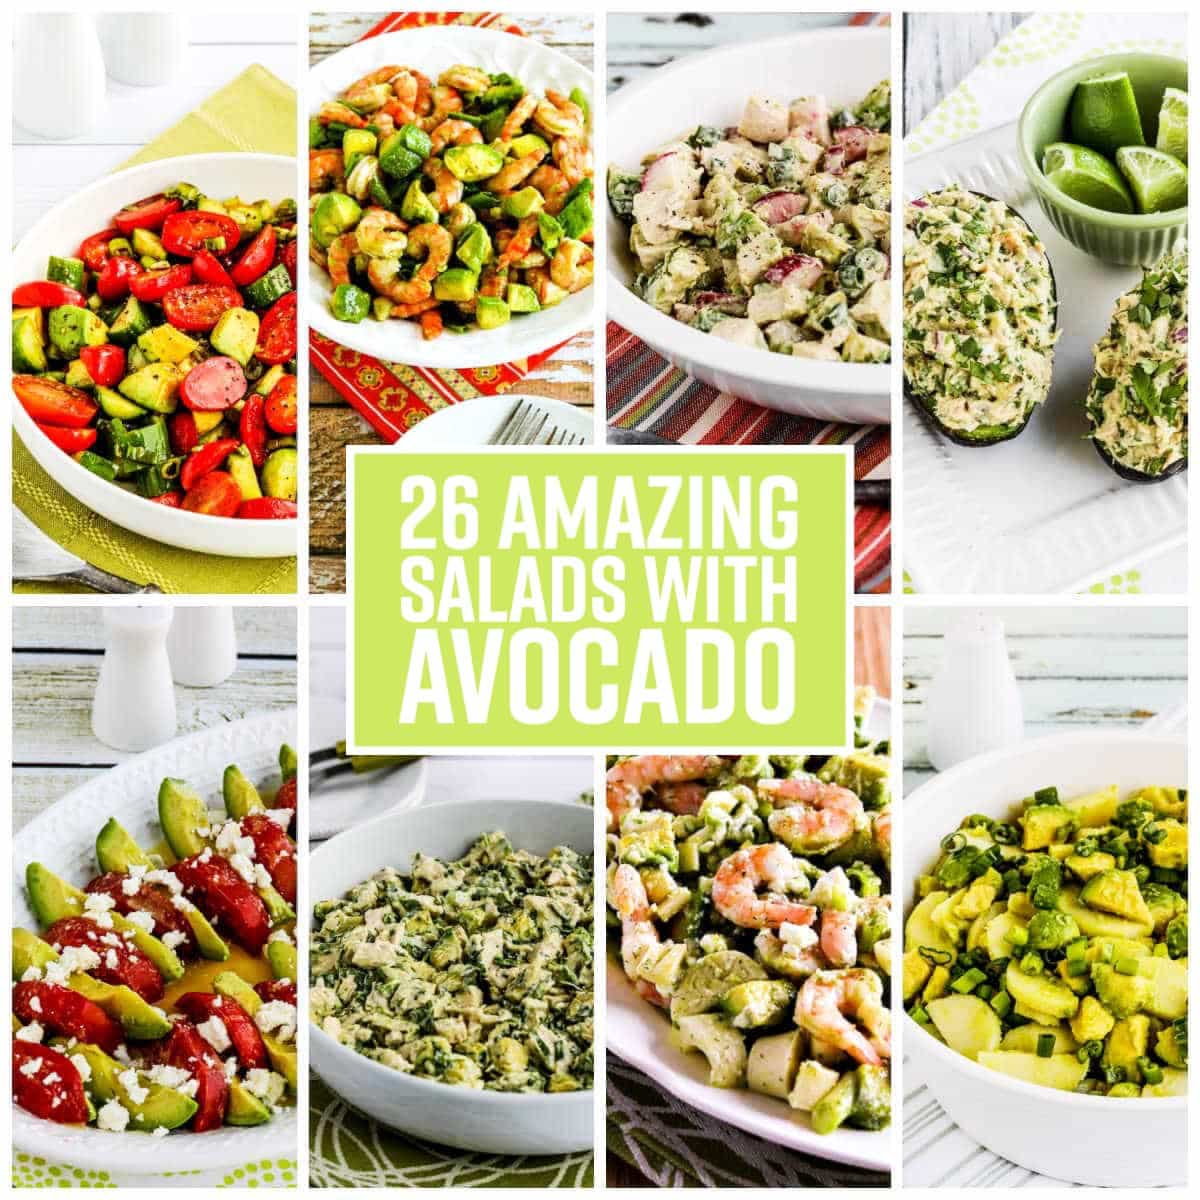 26 Amazing Salads with Avocado collage with text overlay.